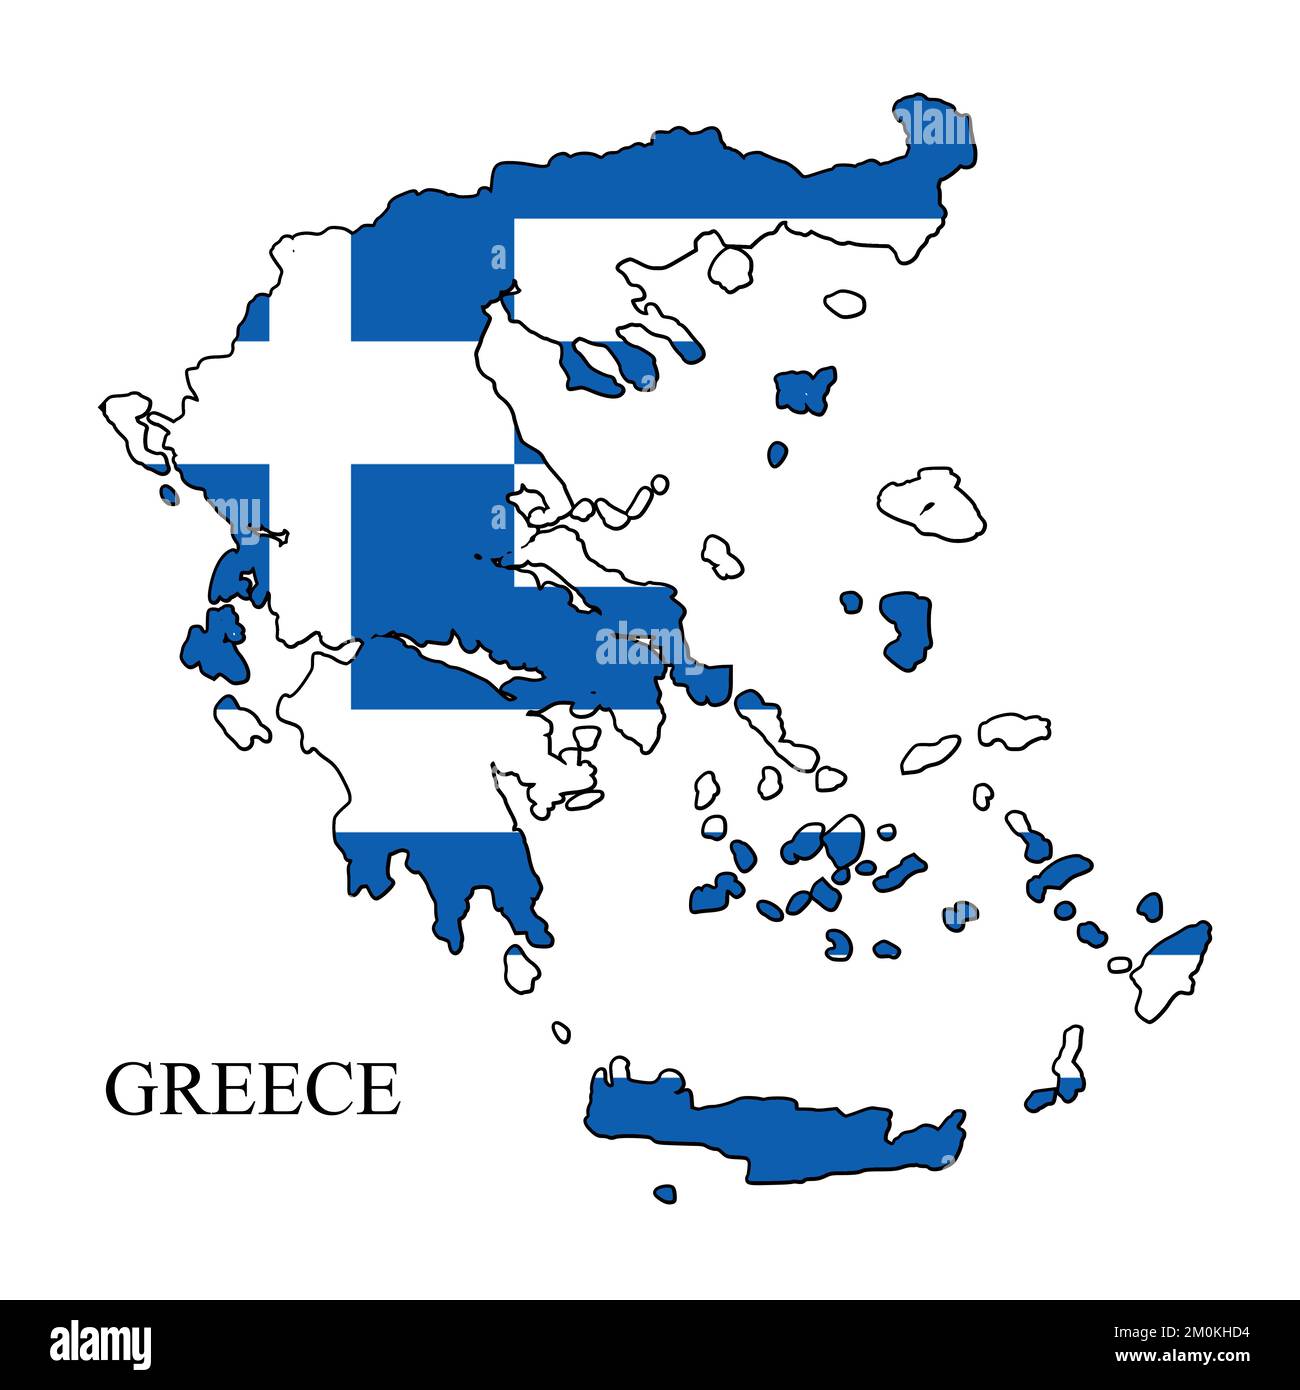 Greece map vector illustration. Global economy. Famous country. Southern Europe. Europe. Stock Vector